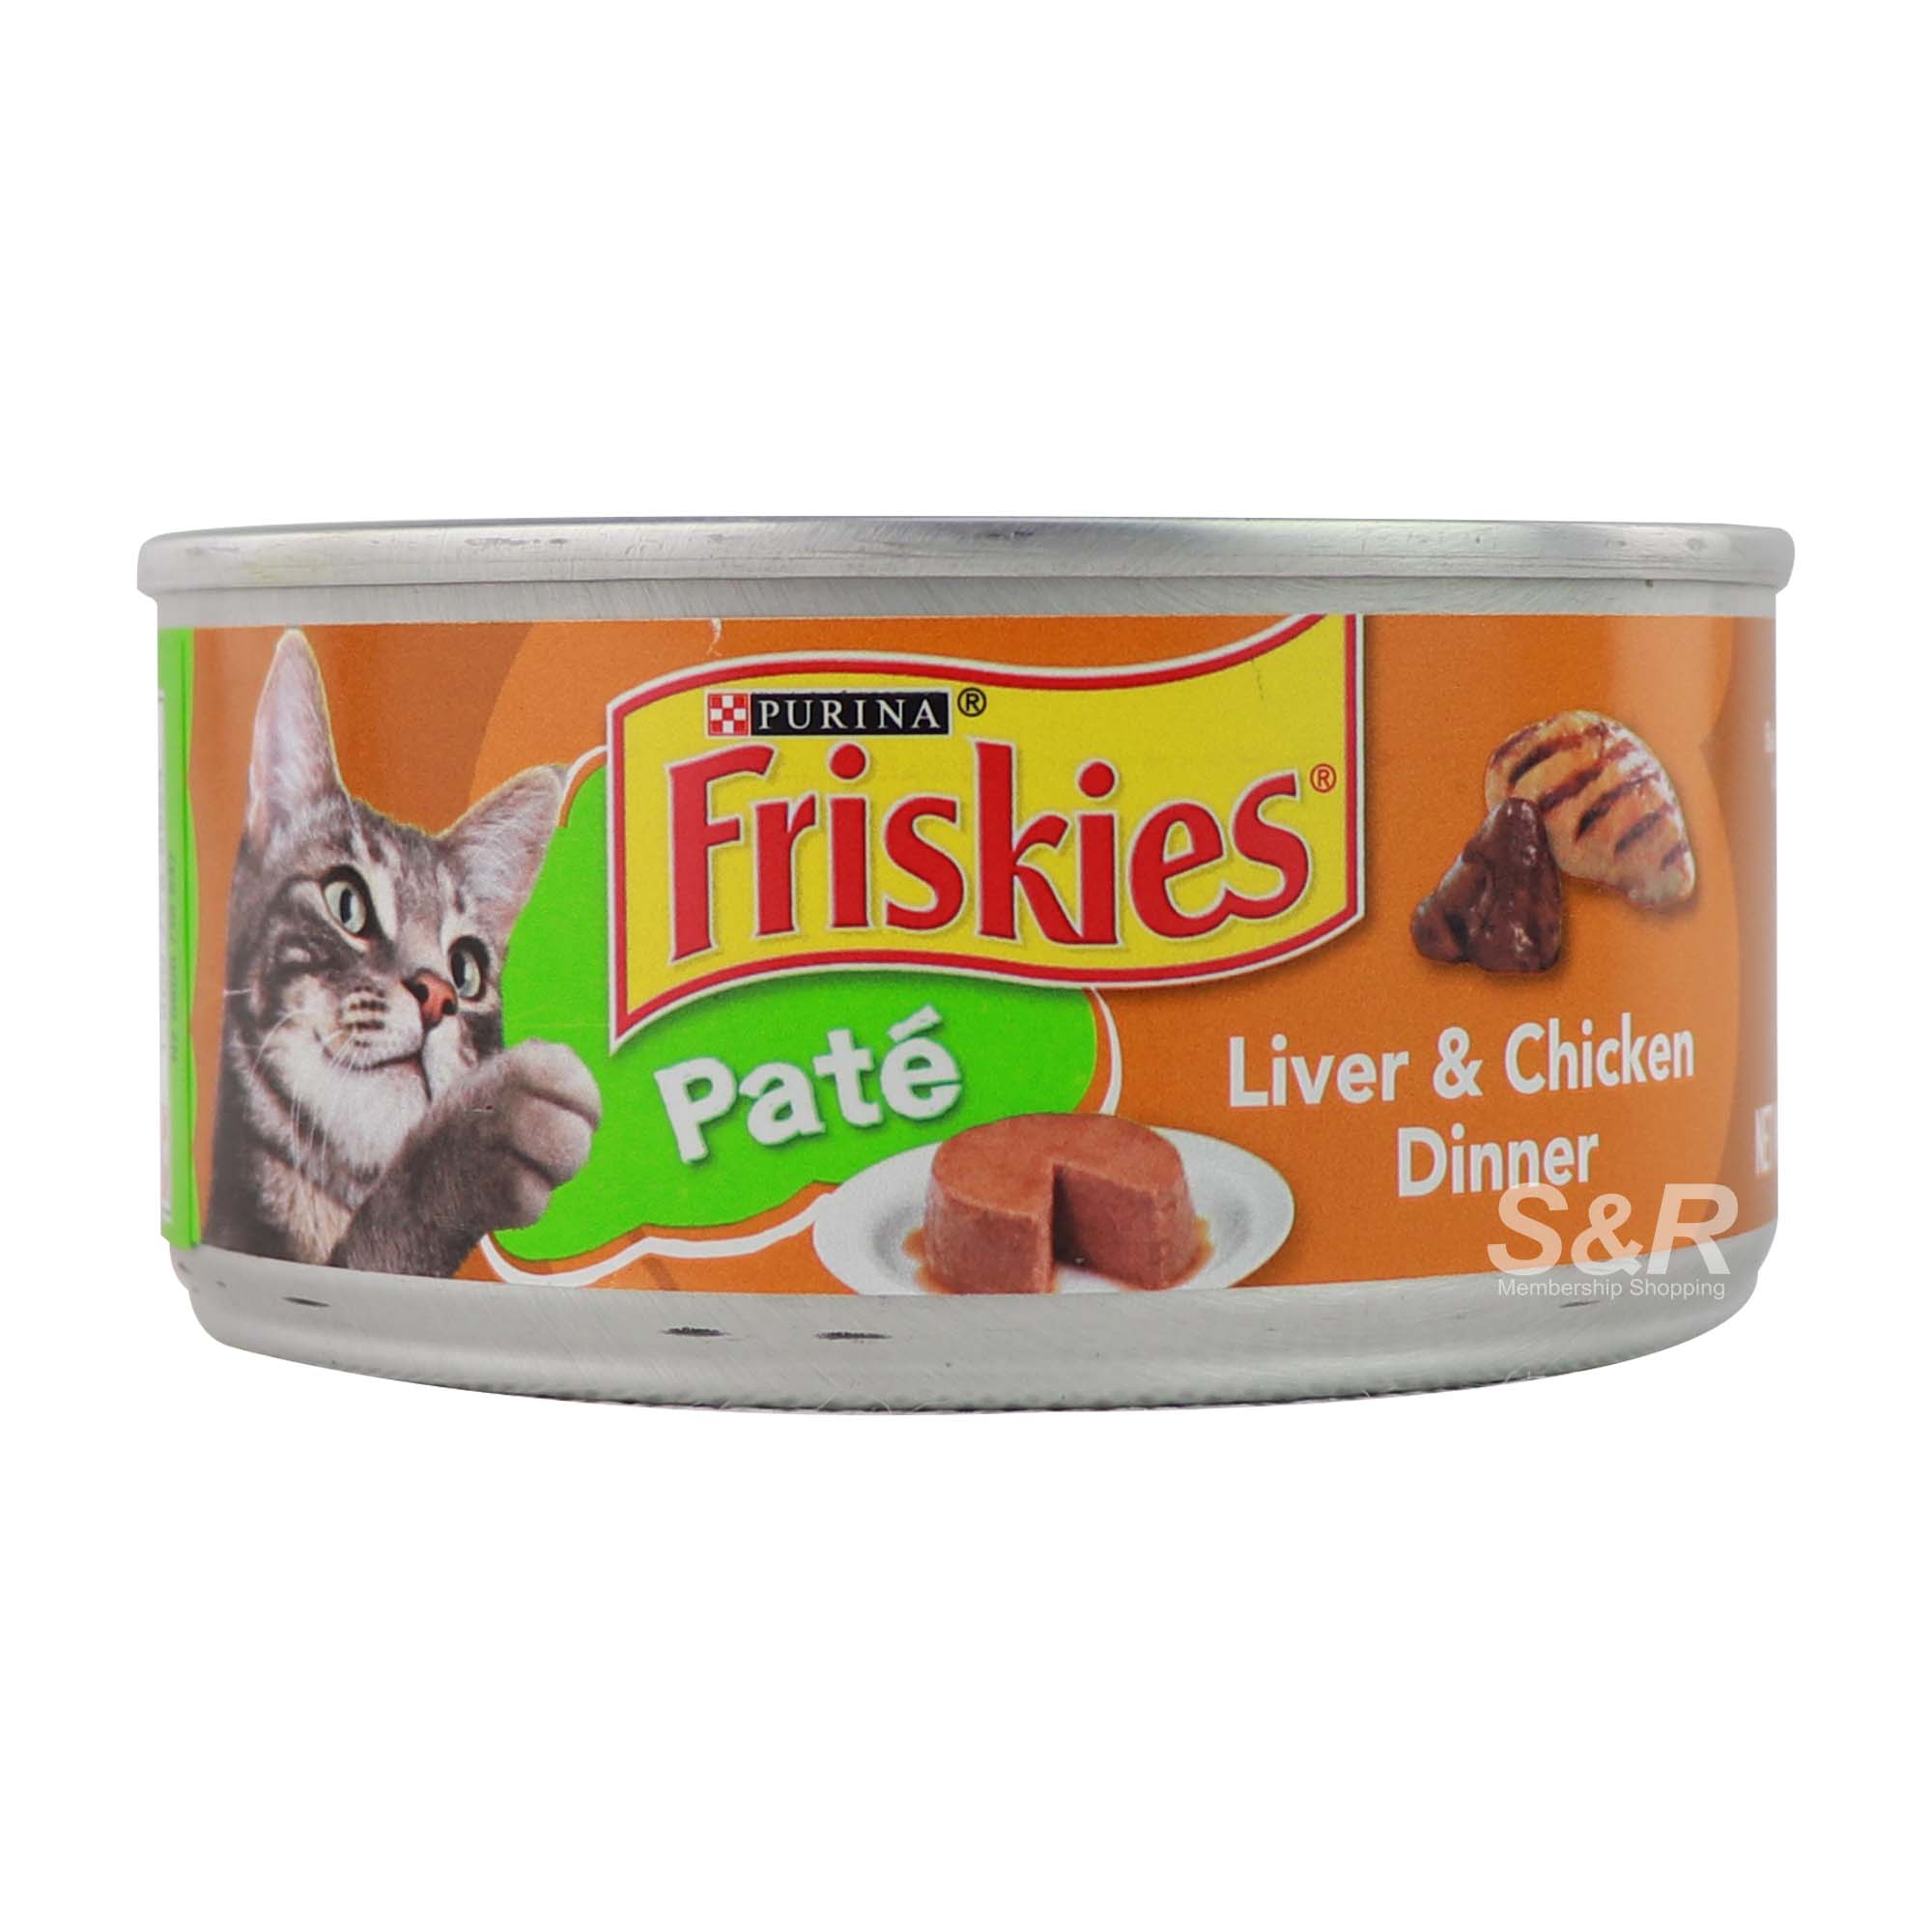 Purina Friskies Pate Liver and Chicken Dinner Cat Food 156g